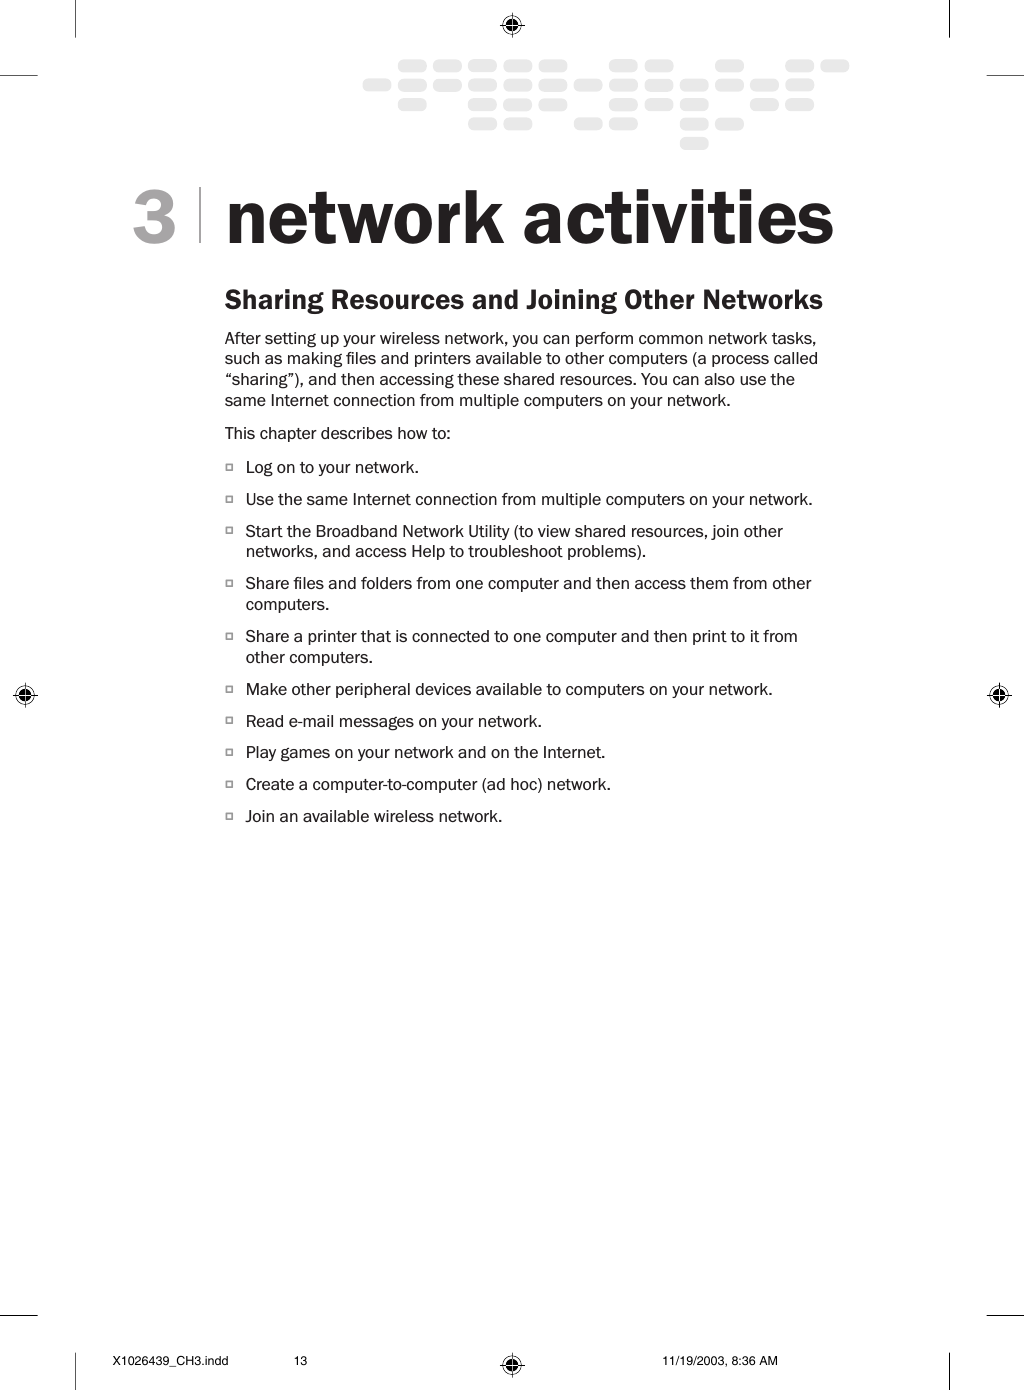 network activitiesSharing Resources and Joining Other NetworksAfter setting up your wireless network, you can perform common network tasks, such as making les and printers available to other computers (a process called “sharing”), and then accessing these shared resources. You can also use the same Internet connection from multiple computers on your network. This chapter describes how to:O  Log on to your network.O  Use the same Internet connection from multiple computers on your network. O  Start the Broadband Network Utility (to view shared resources, join other networks, and access Help to troubleshoot problems).O  Share les and folders from one computer and then access them from other computers. O  Share a printer that is connected to one computer and then print to it from other computers. O  Make other peripheral devices available to computers on your network. O  Read e-mail messages on your network.O  Play games on your network and on the Internet.O  Create a computer-to-computer (ad hoc) network.O  Join an available wireless network.3X1026439_CH3.indd 11/19/2003, 8:36 AM13